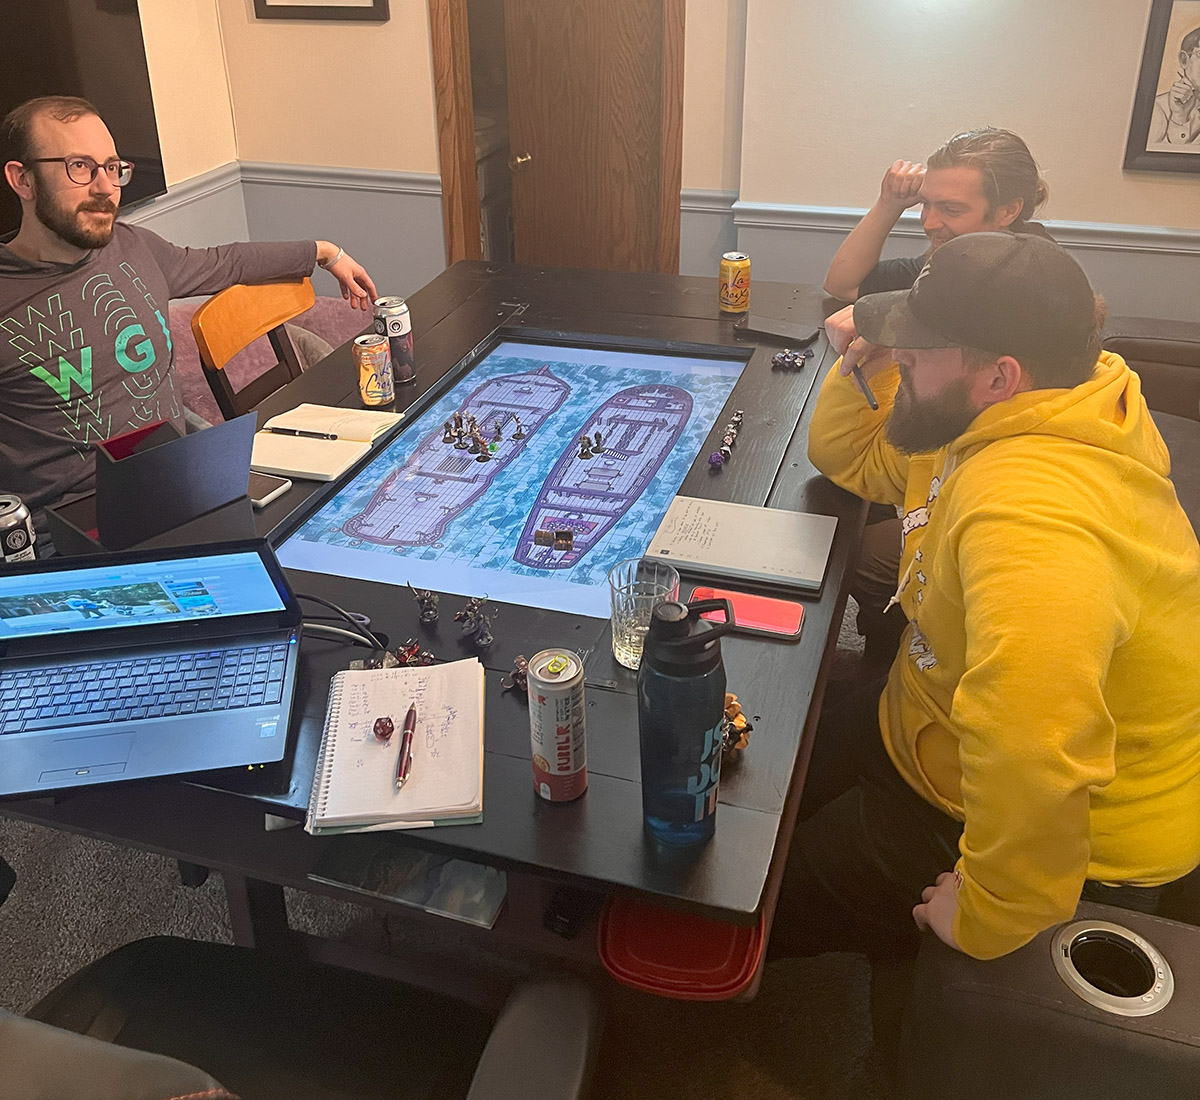 DnD gaming session on new custom TV gaming table.